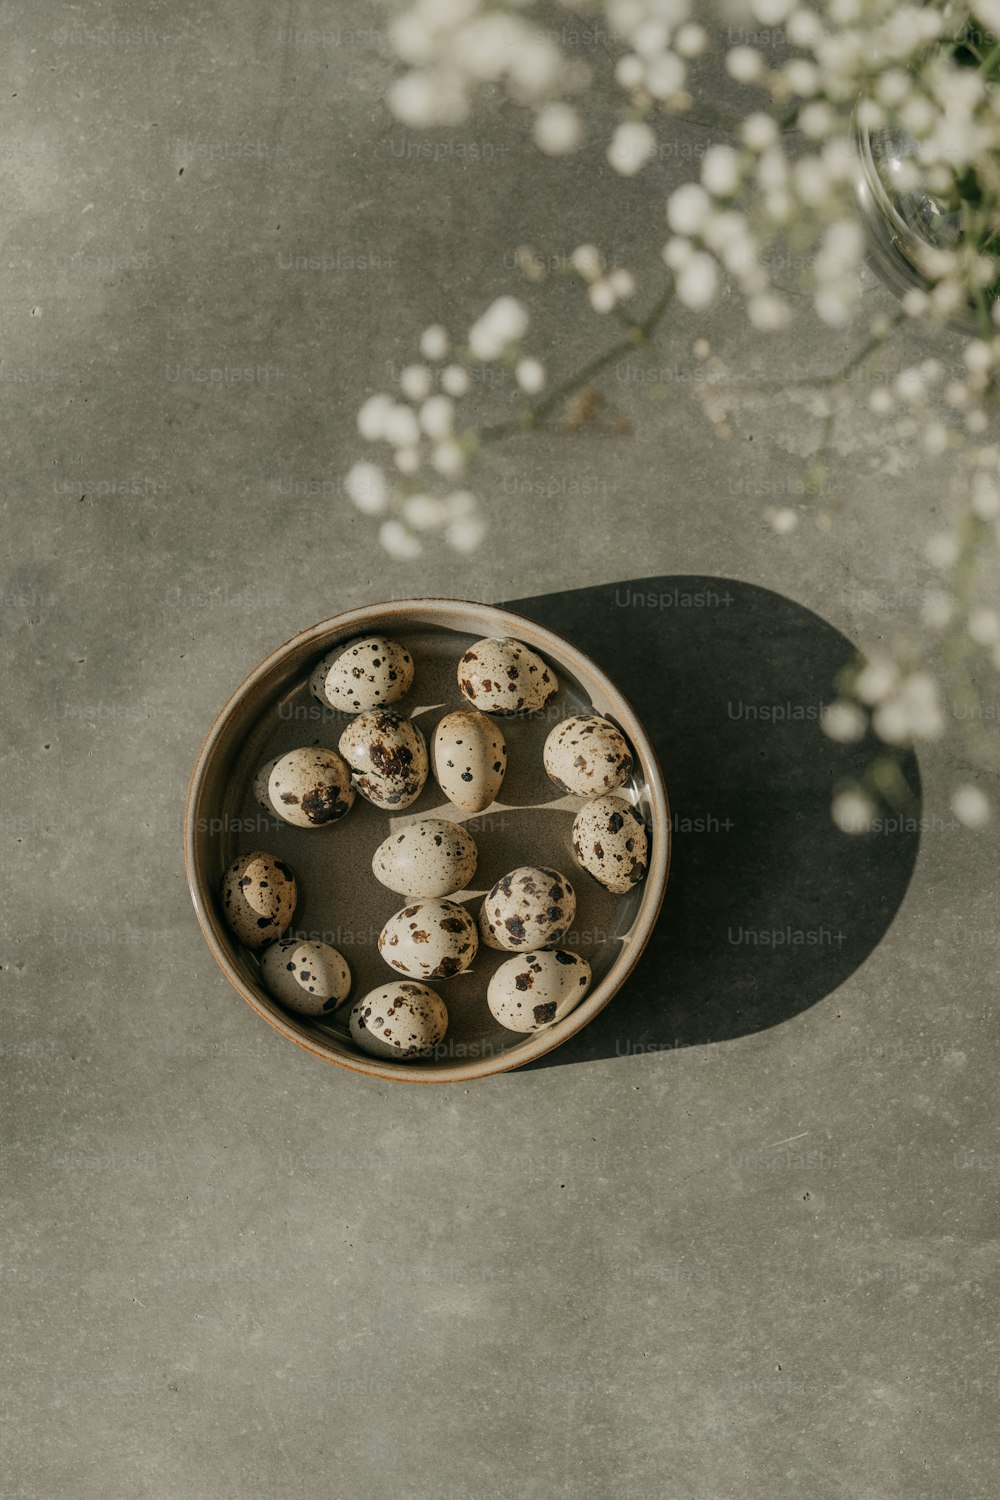 a bowl of quails on a table with flowers